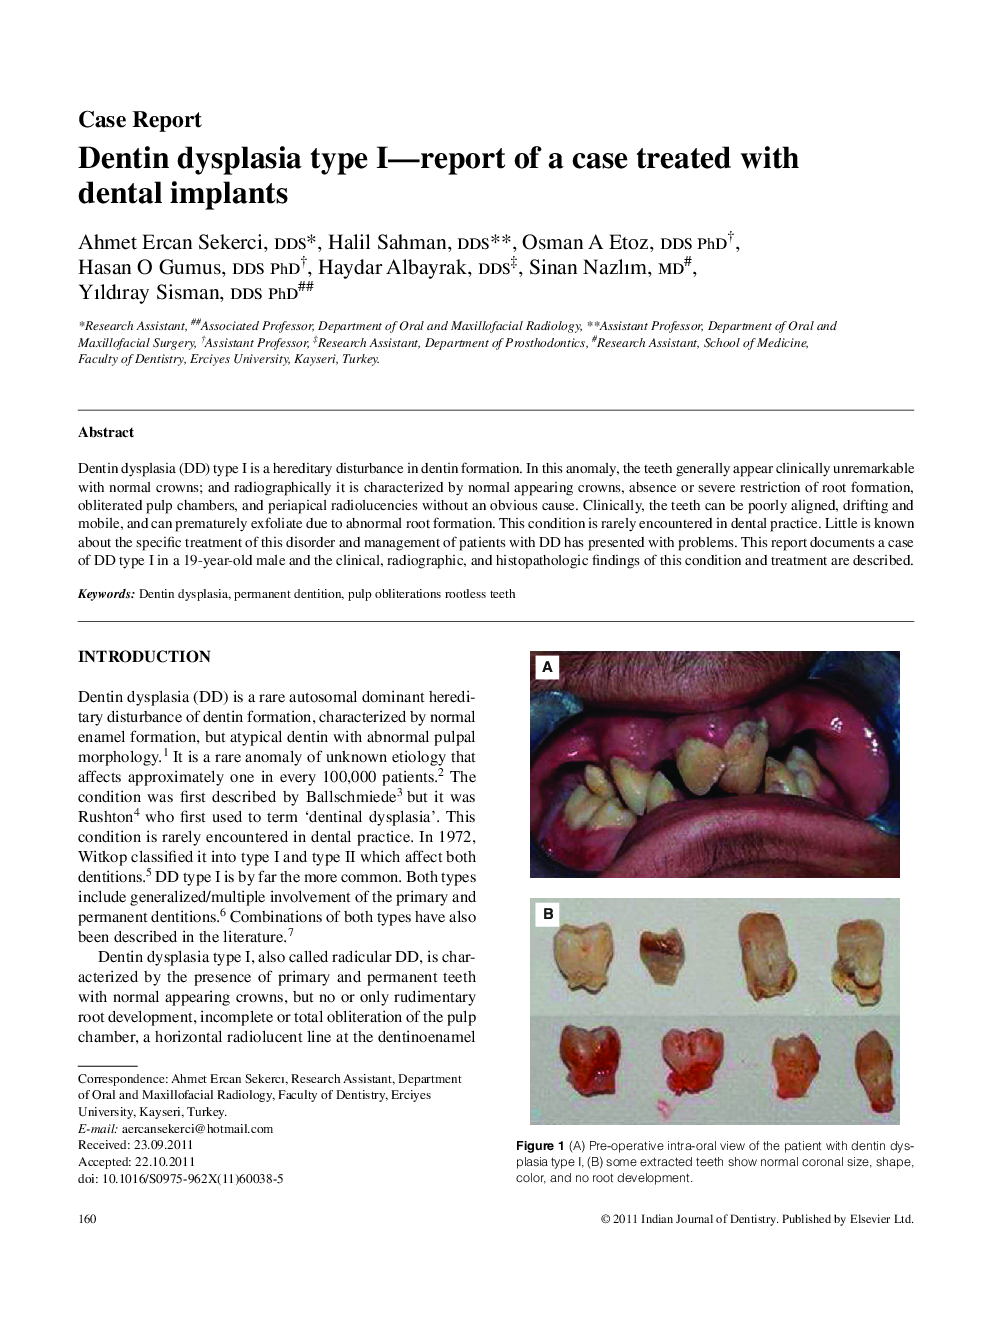 Dentin dysplasia type I-report of a case treated with dental implants